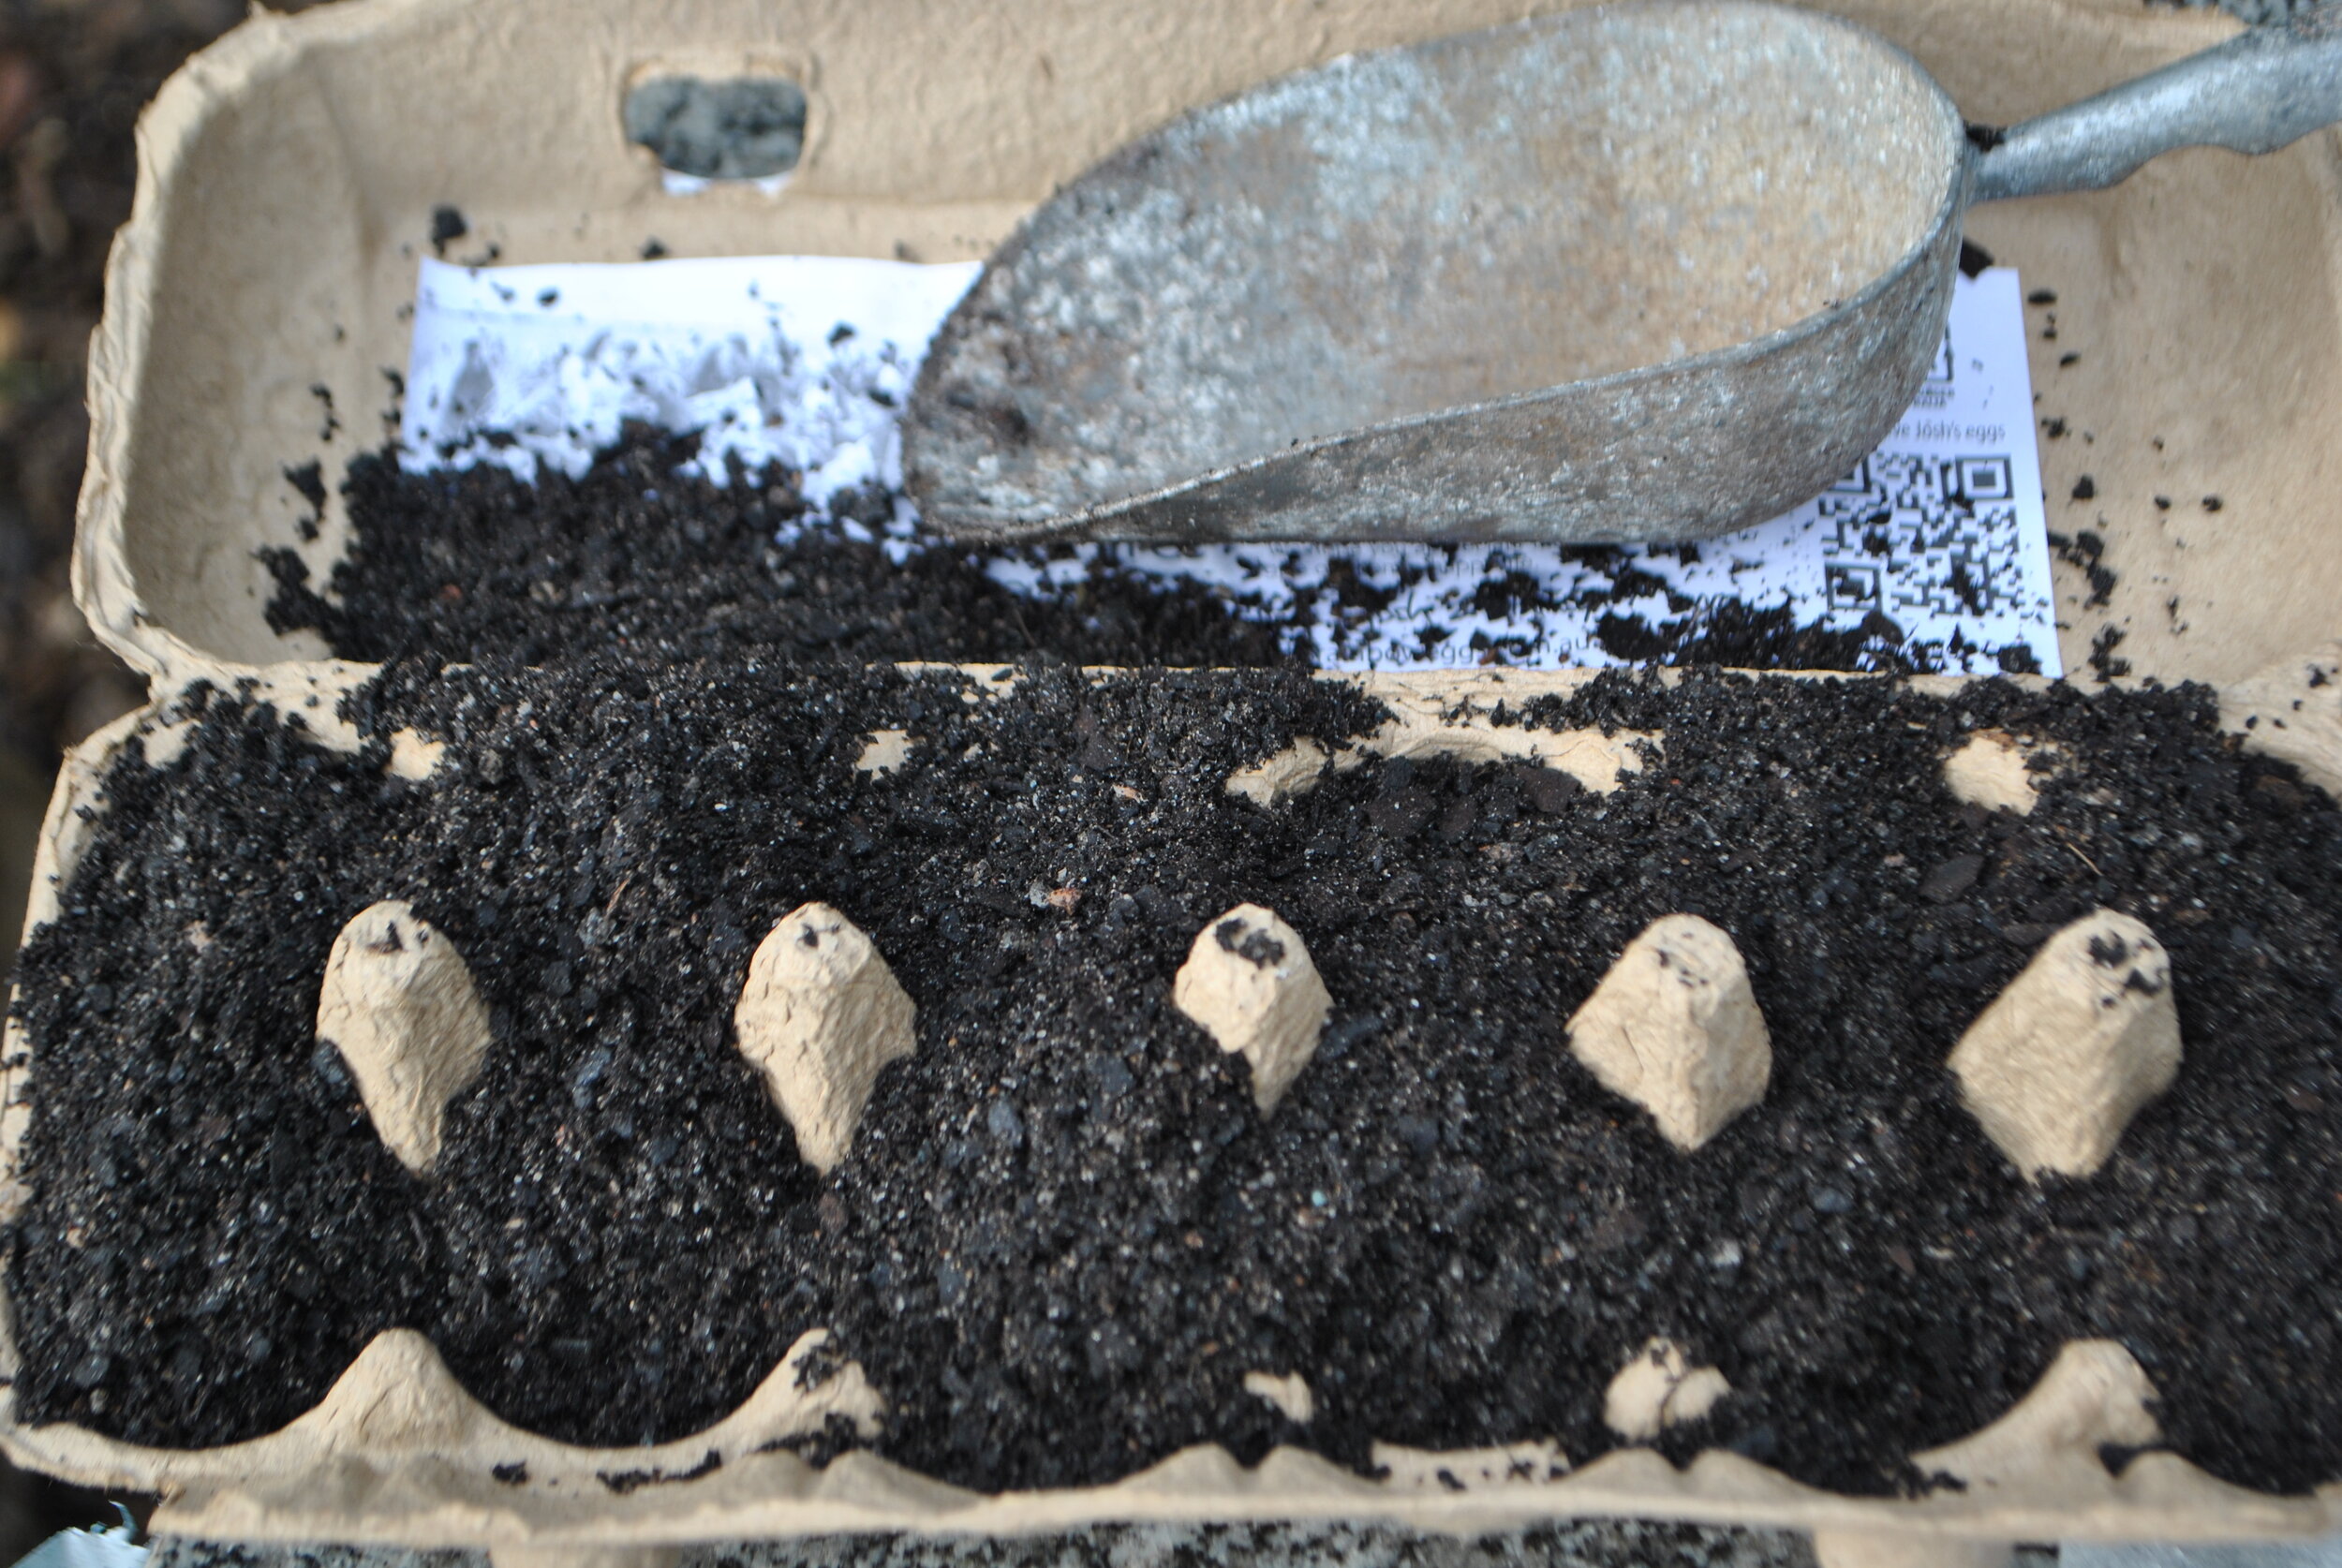 Fill your used egg-carton with about 3/4 of the seed raising mix.